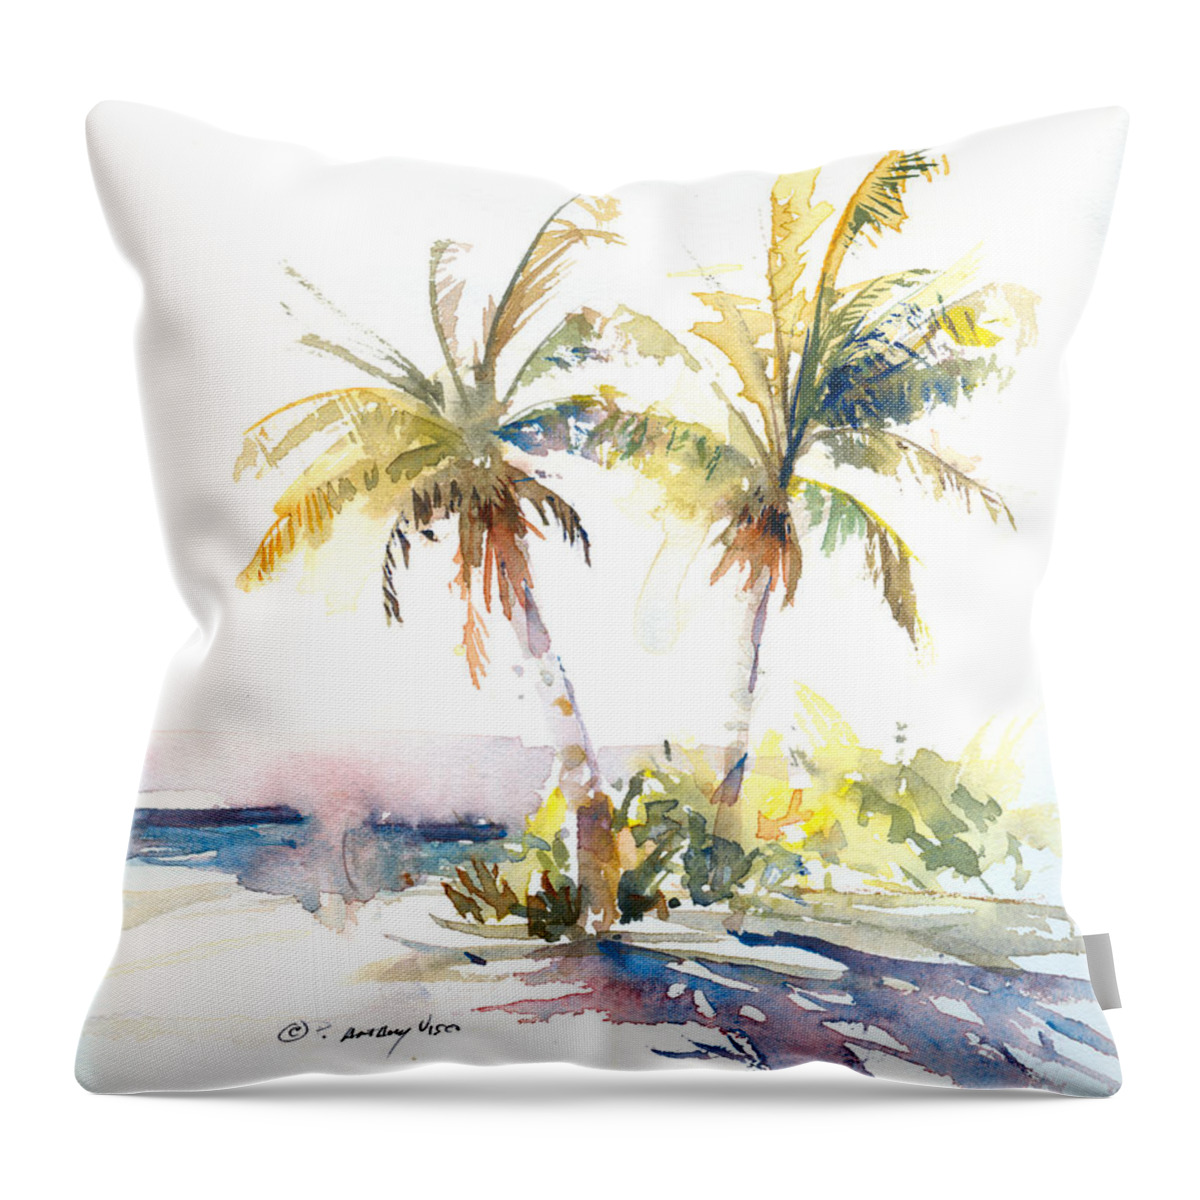 Sunlight Throw Pillow featuring the painting Palm Shadows by P Anthony Visco